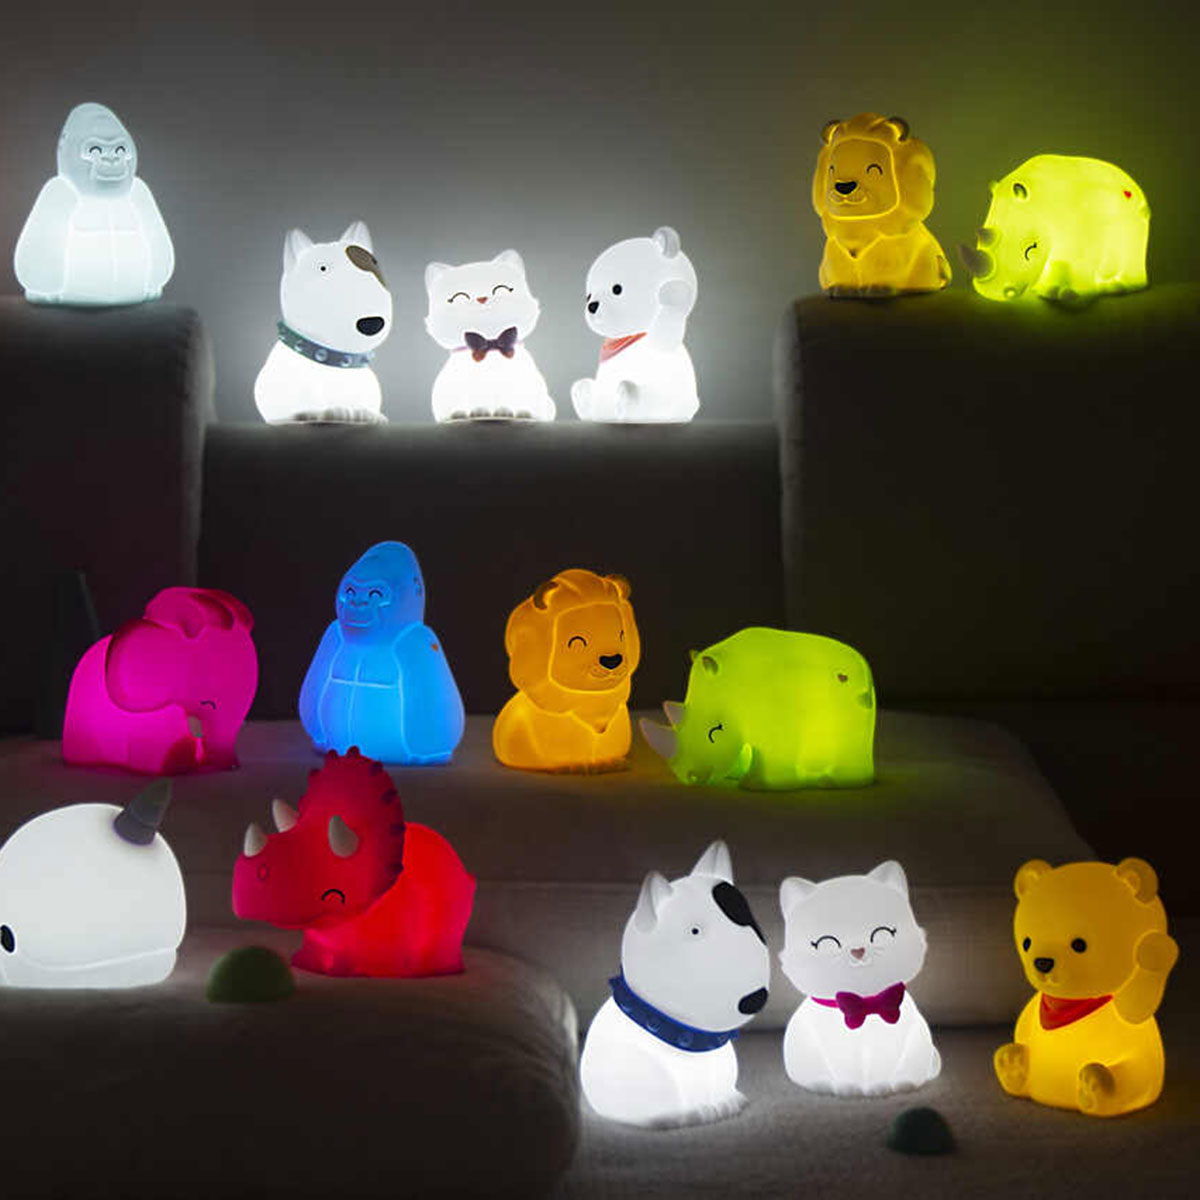 Soft silicone night light - Donnie the Elephant